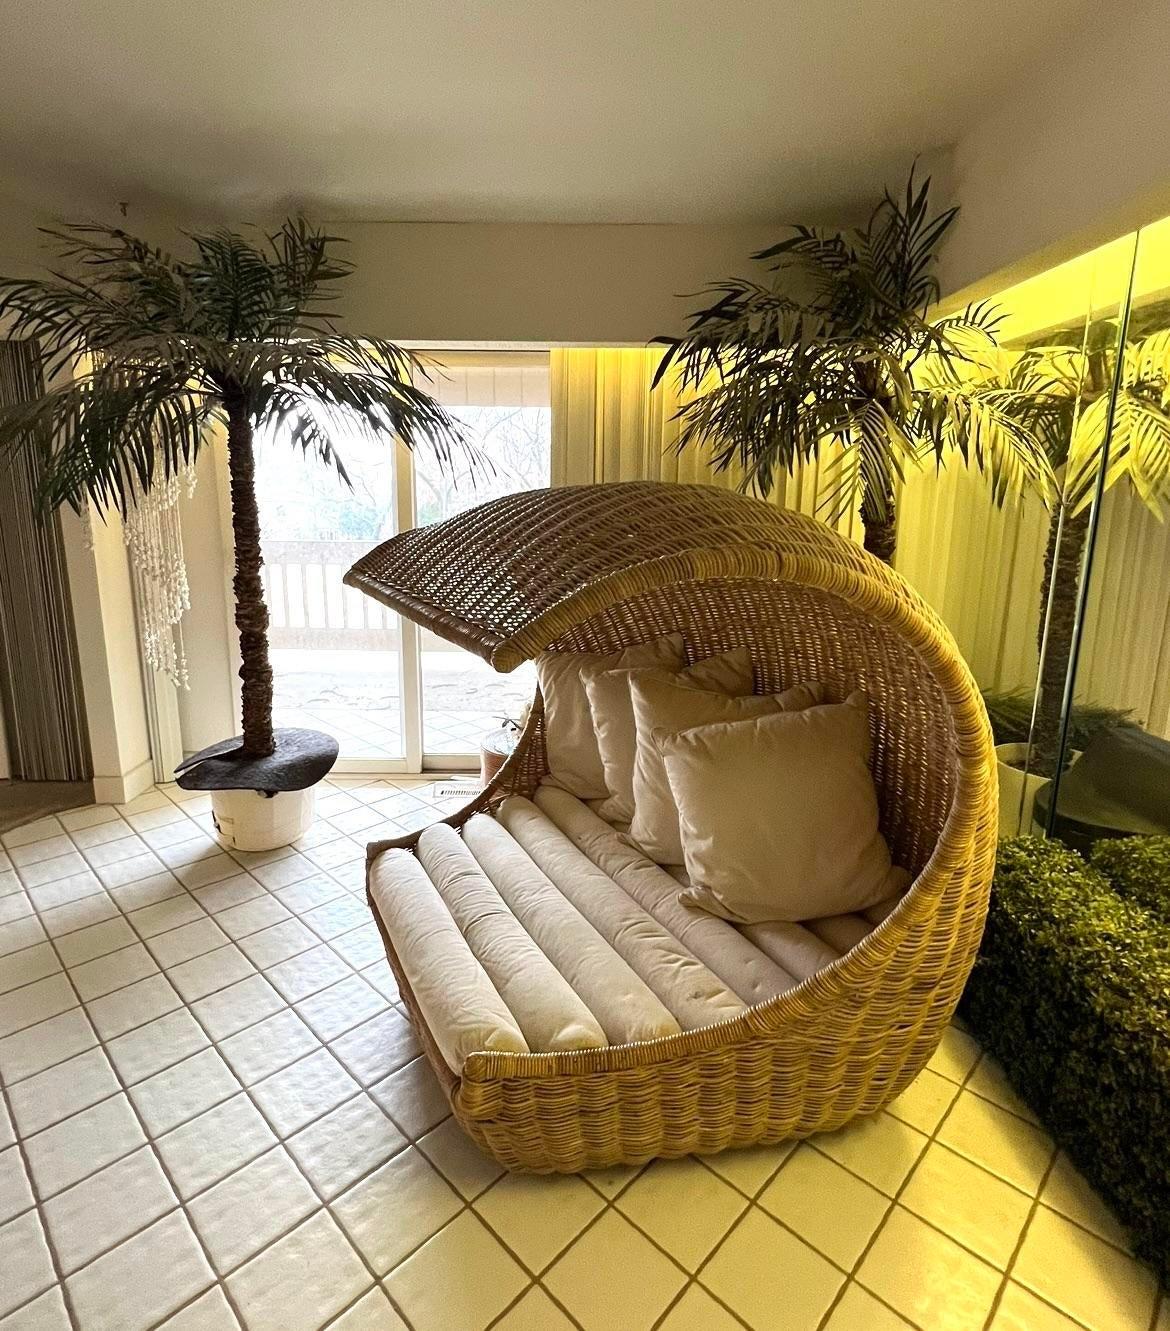 Very unique and one of a kind indoor wicker lounge chair, made in 1970s circa. It is suitable for 2-3 people seating.

Because the lounge has been kept indoor for the past 50+ years, it is in fantastic condition. Original owner custom made it for